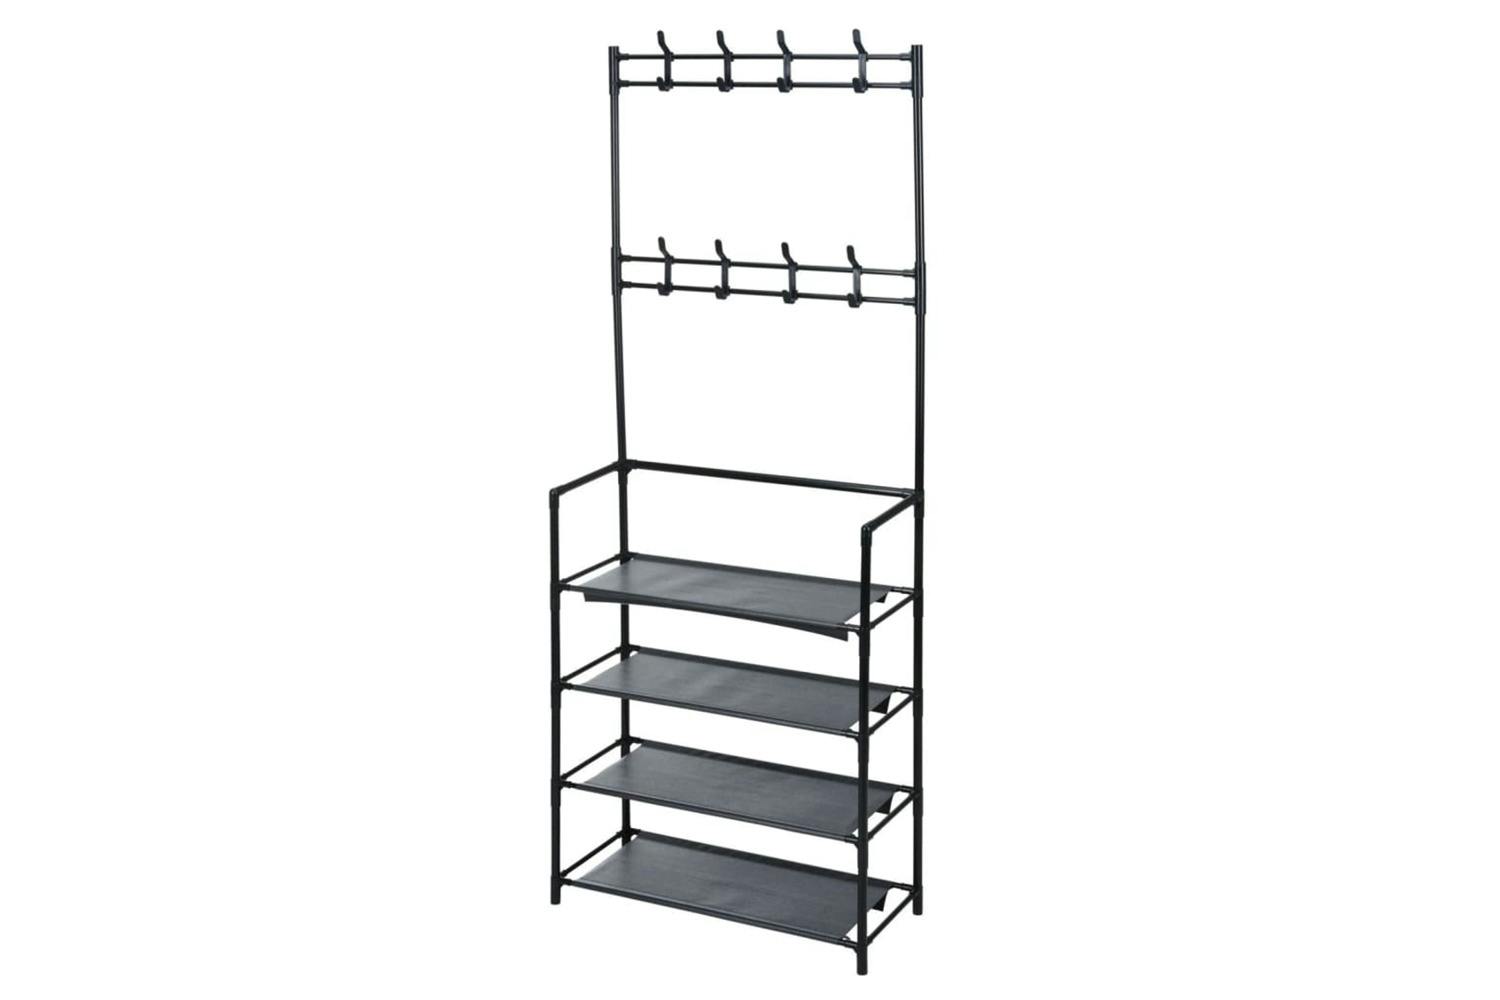 Storage Solutions 442517 Storage Solutions Clothing Rack With 4 Shelves 60x26x155 Cm